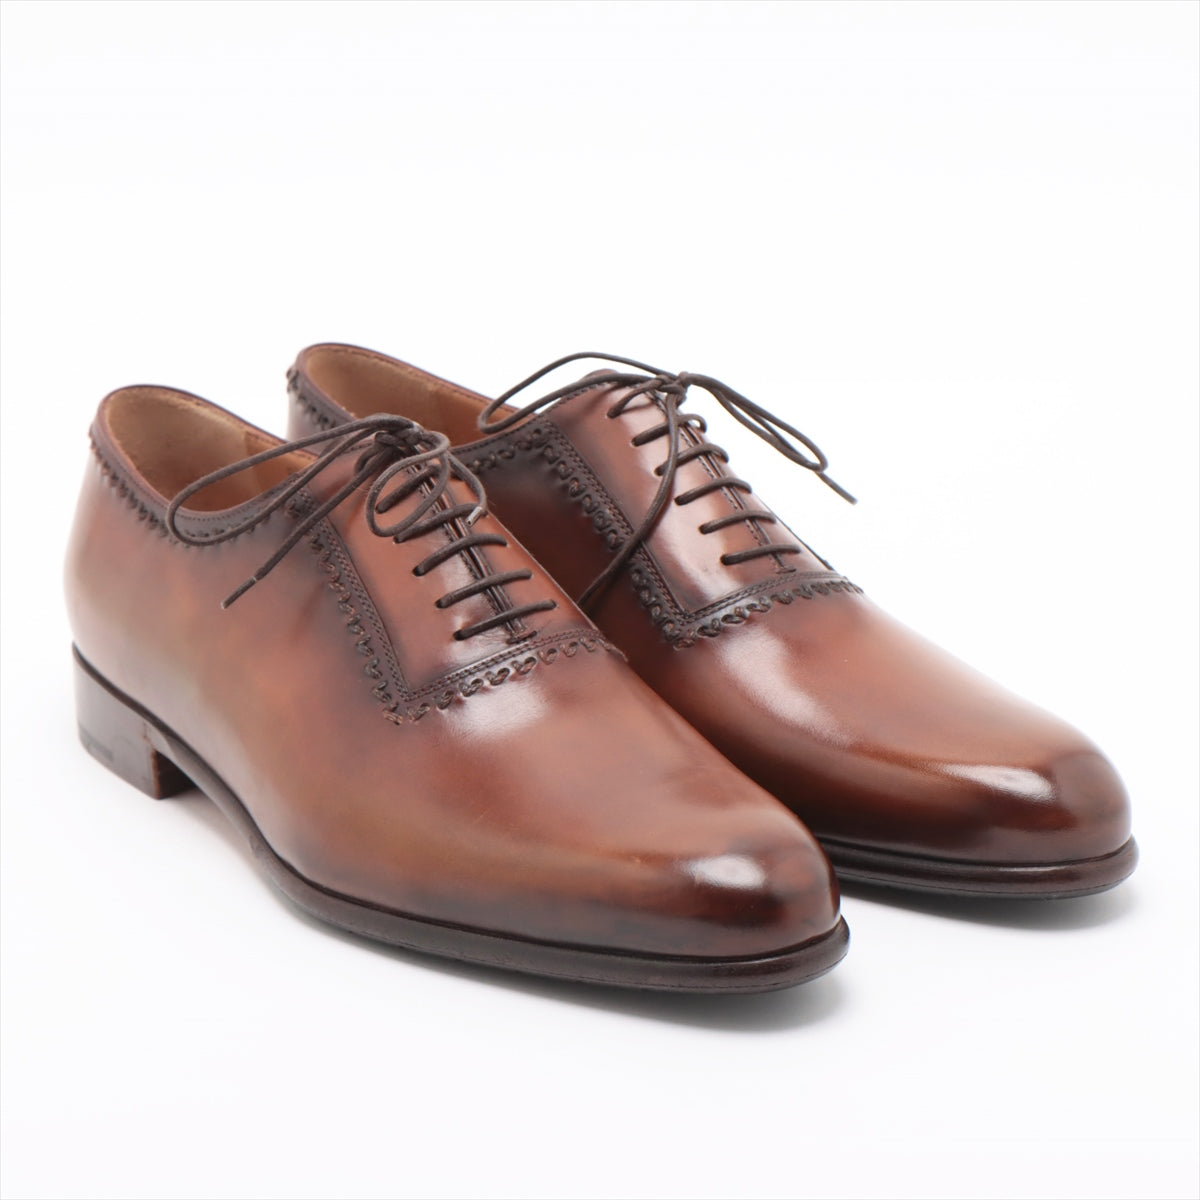 Berluti Leather Dress shoes 8 Men's Brown Comes with genuine shoe keeper stitching